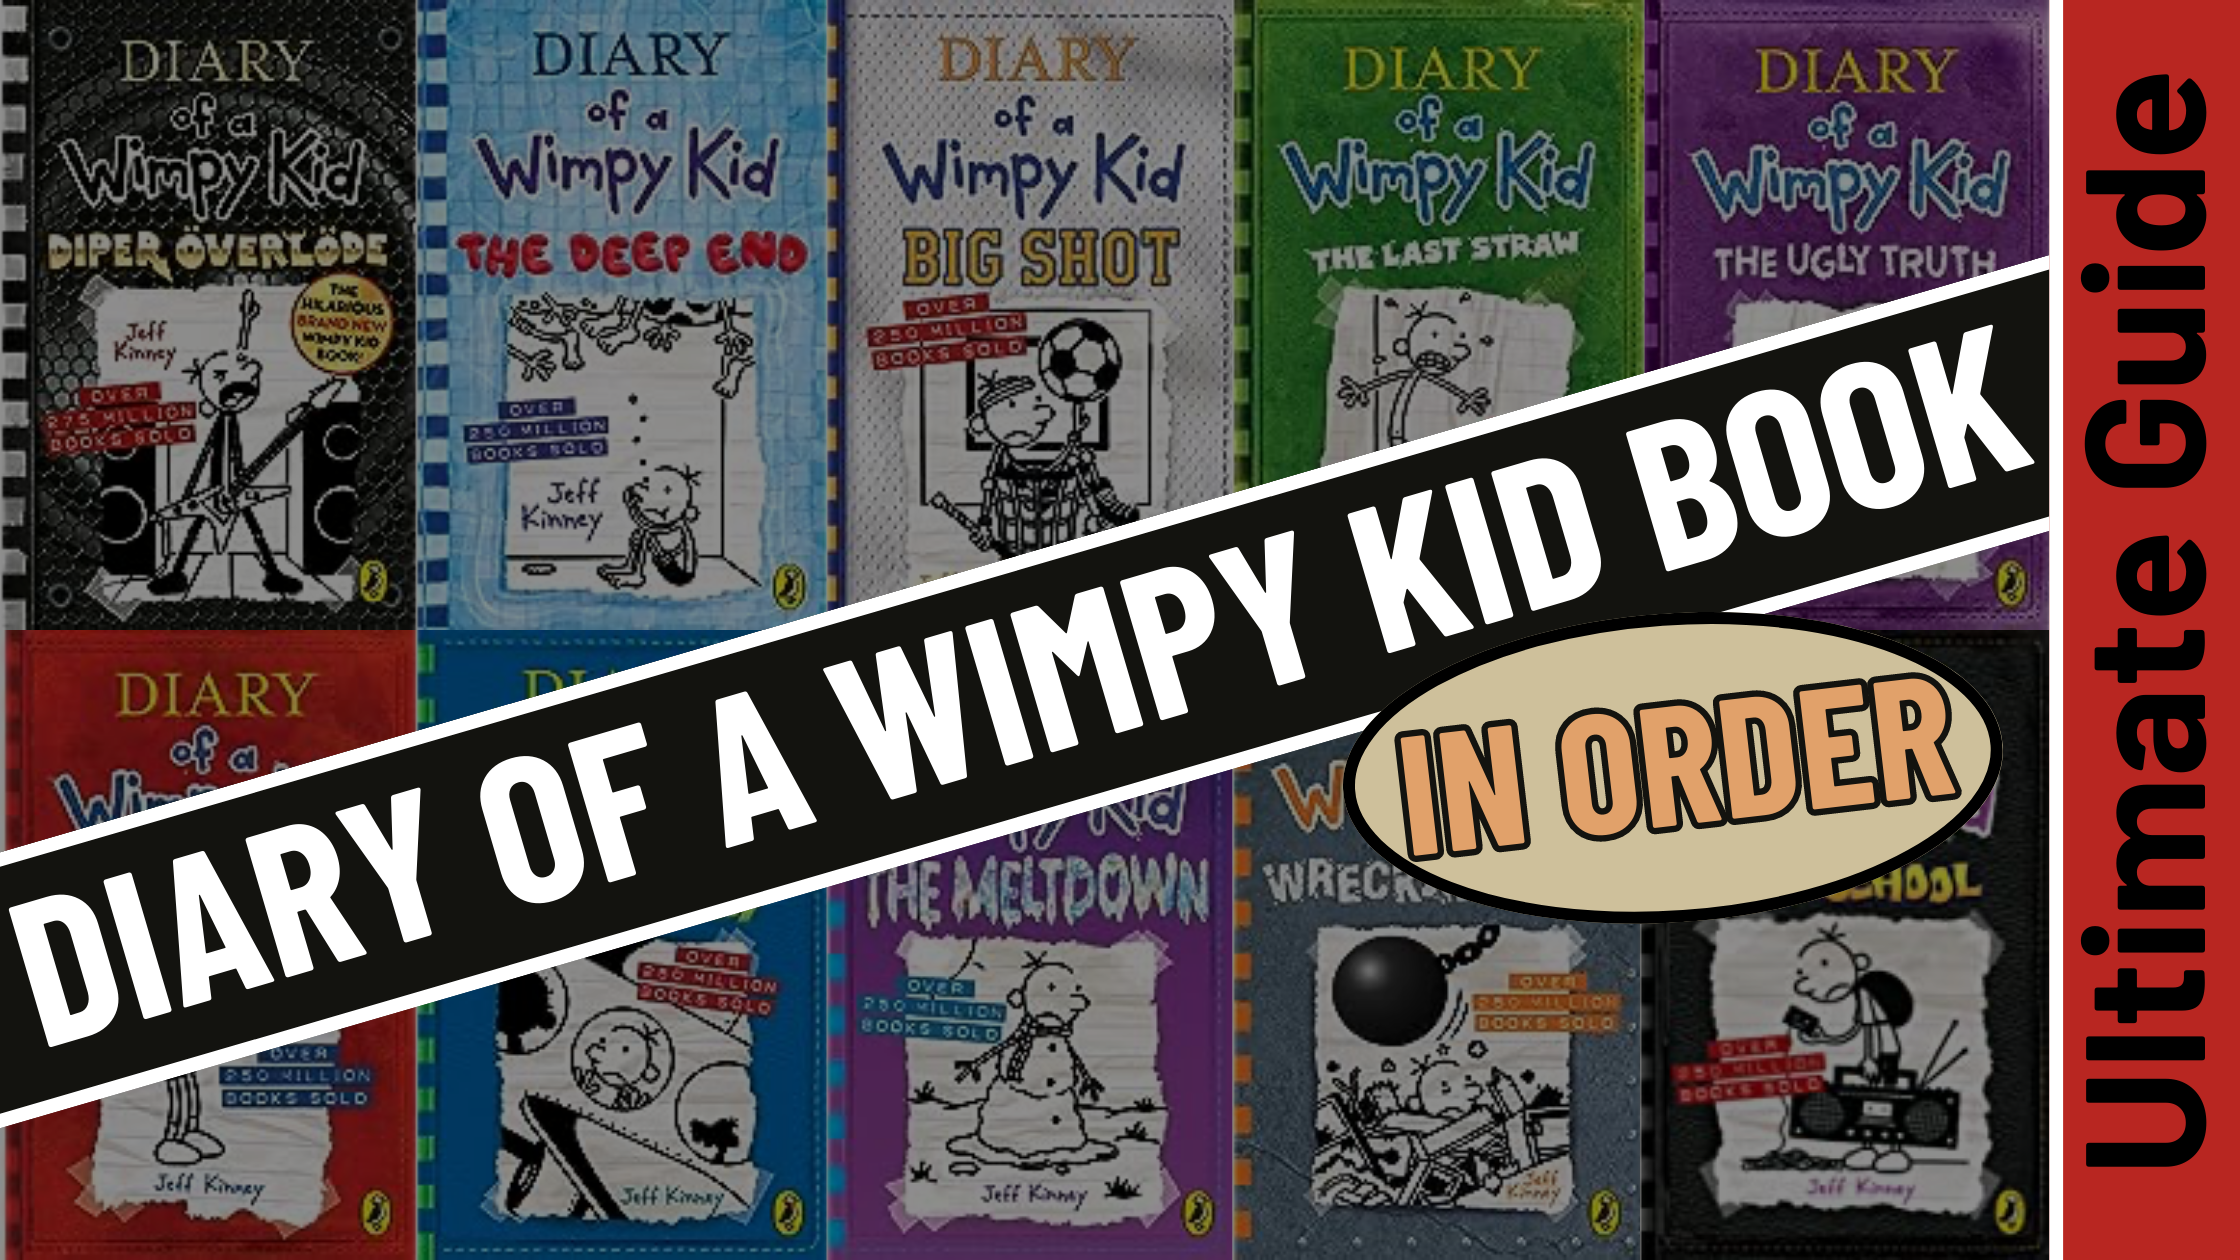 Diary of a wimpy kid books in order